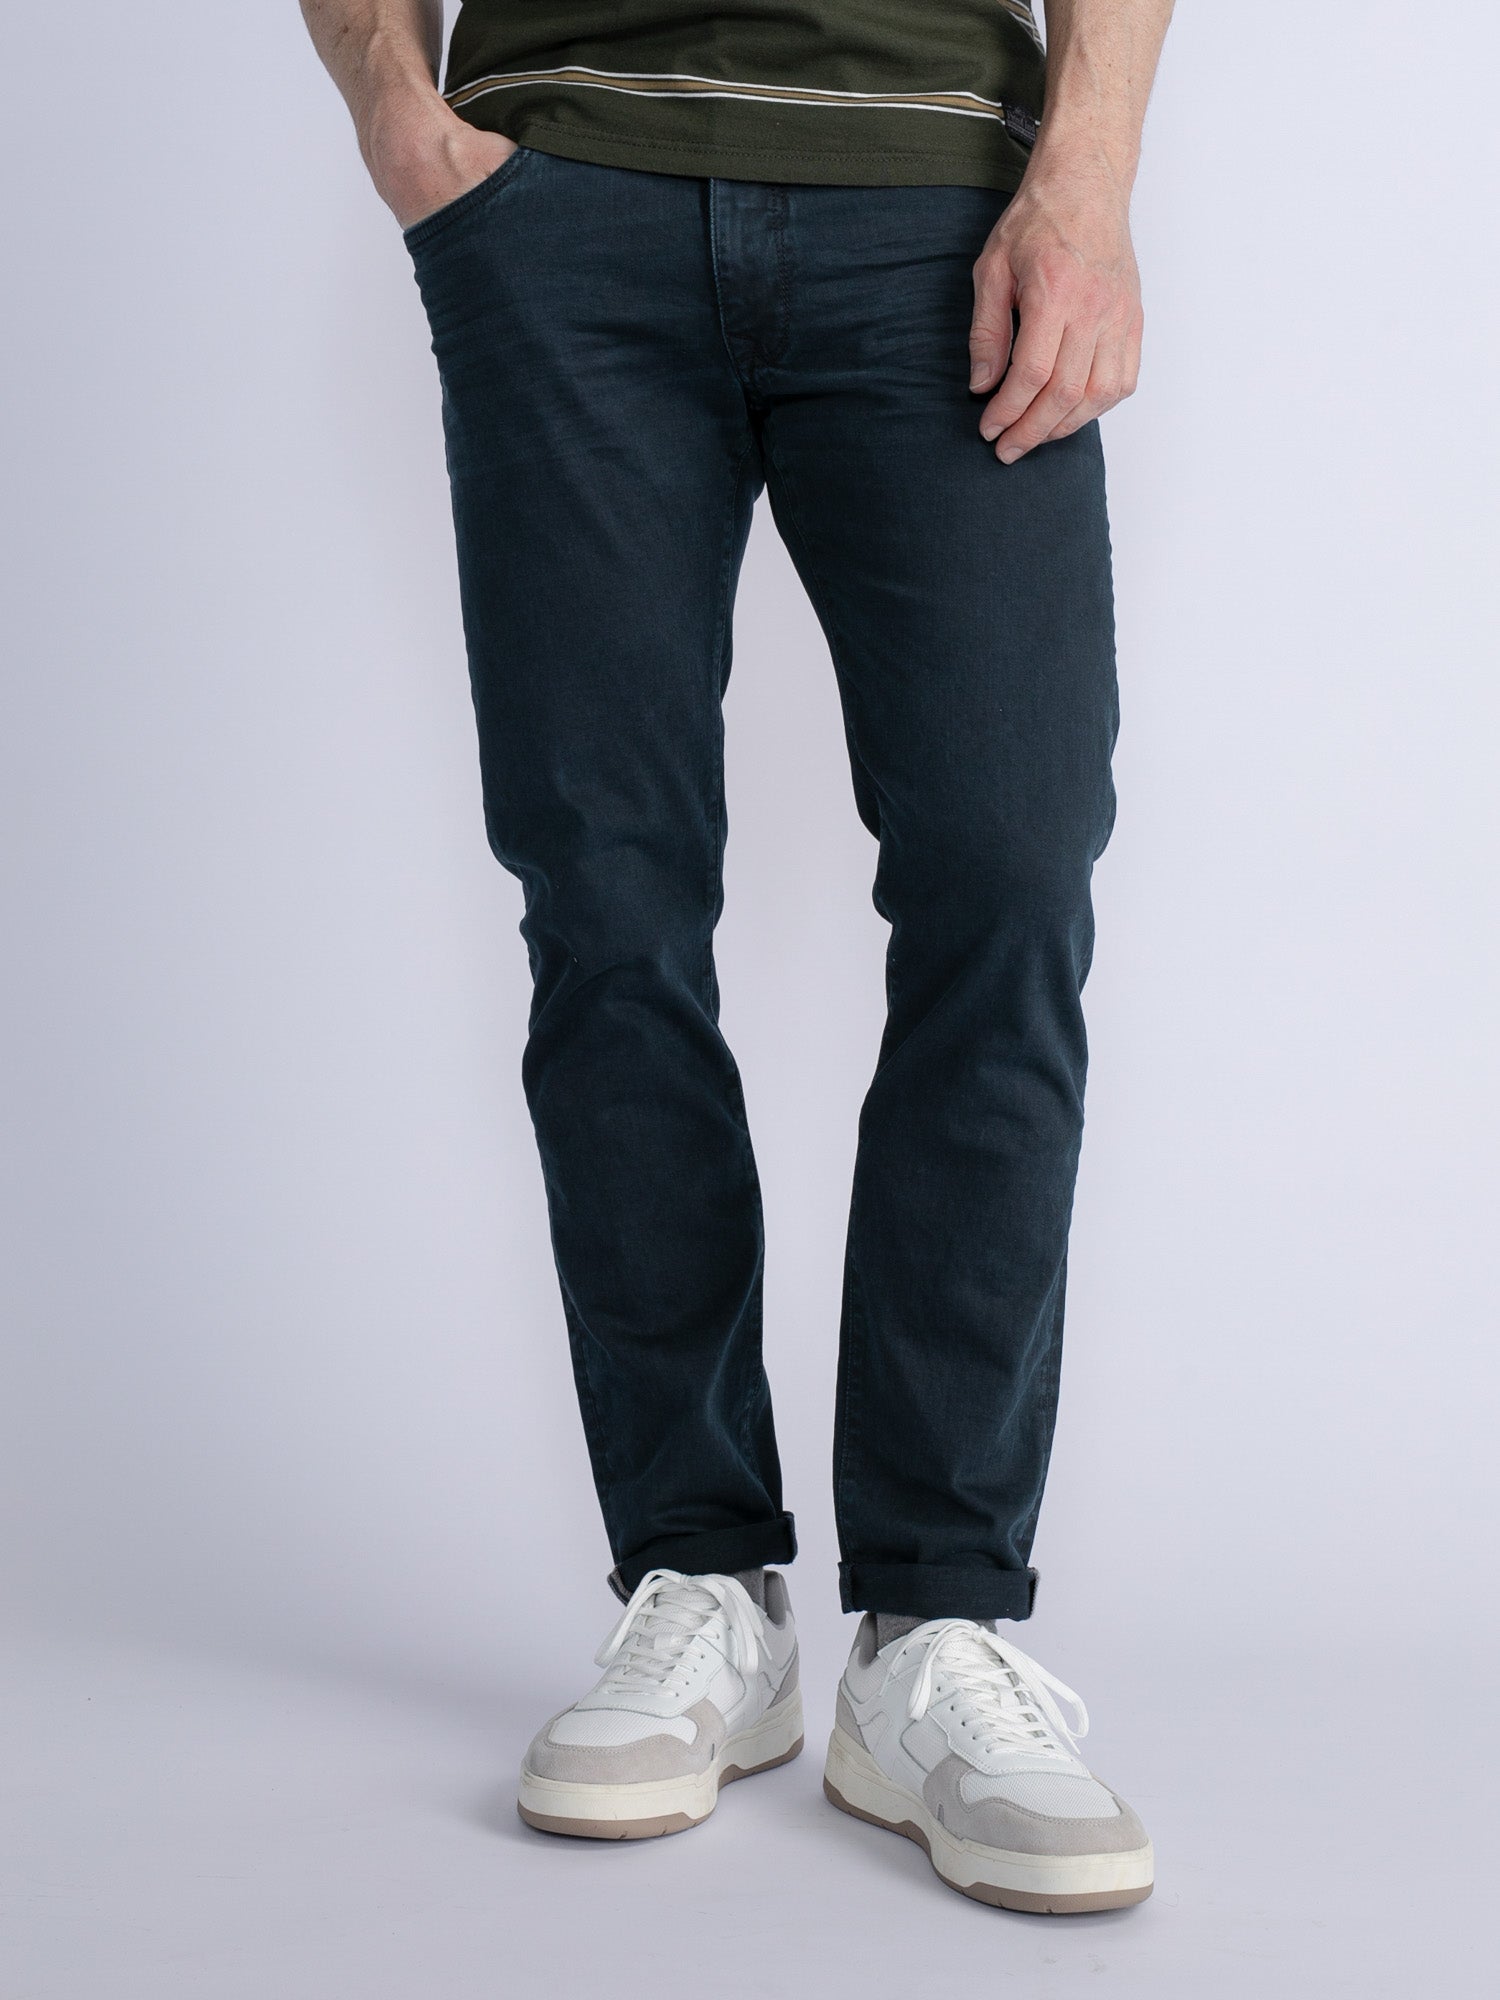 Seaham Colored Slim Fit Jeans Polson | Official Petrol Industries® Online  Store